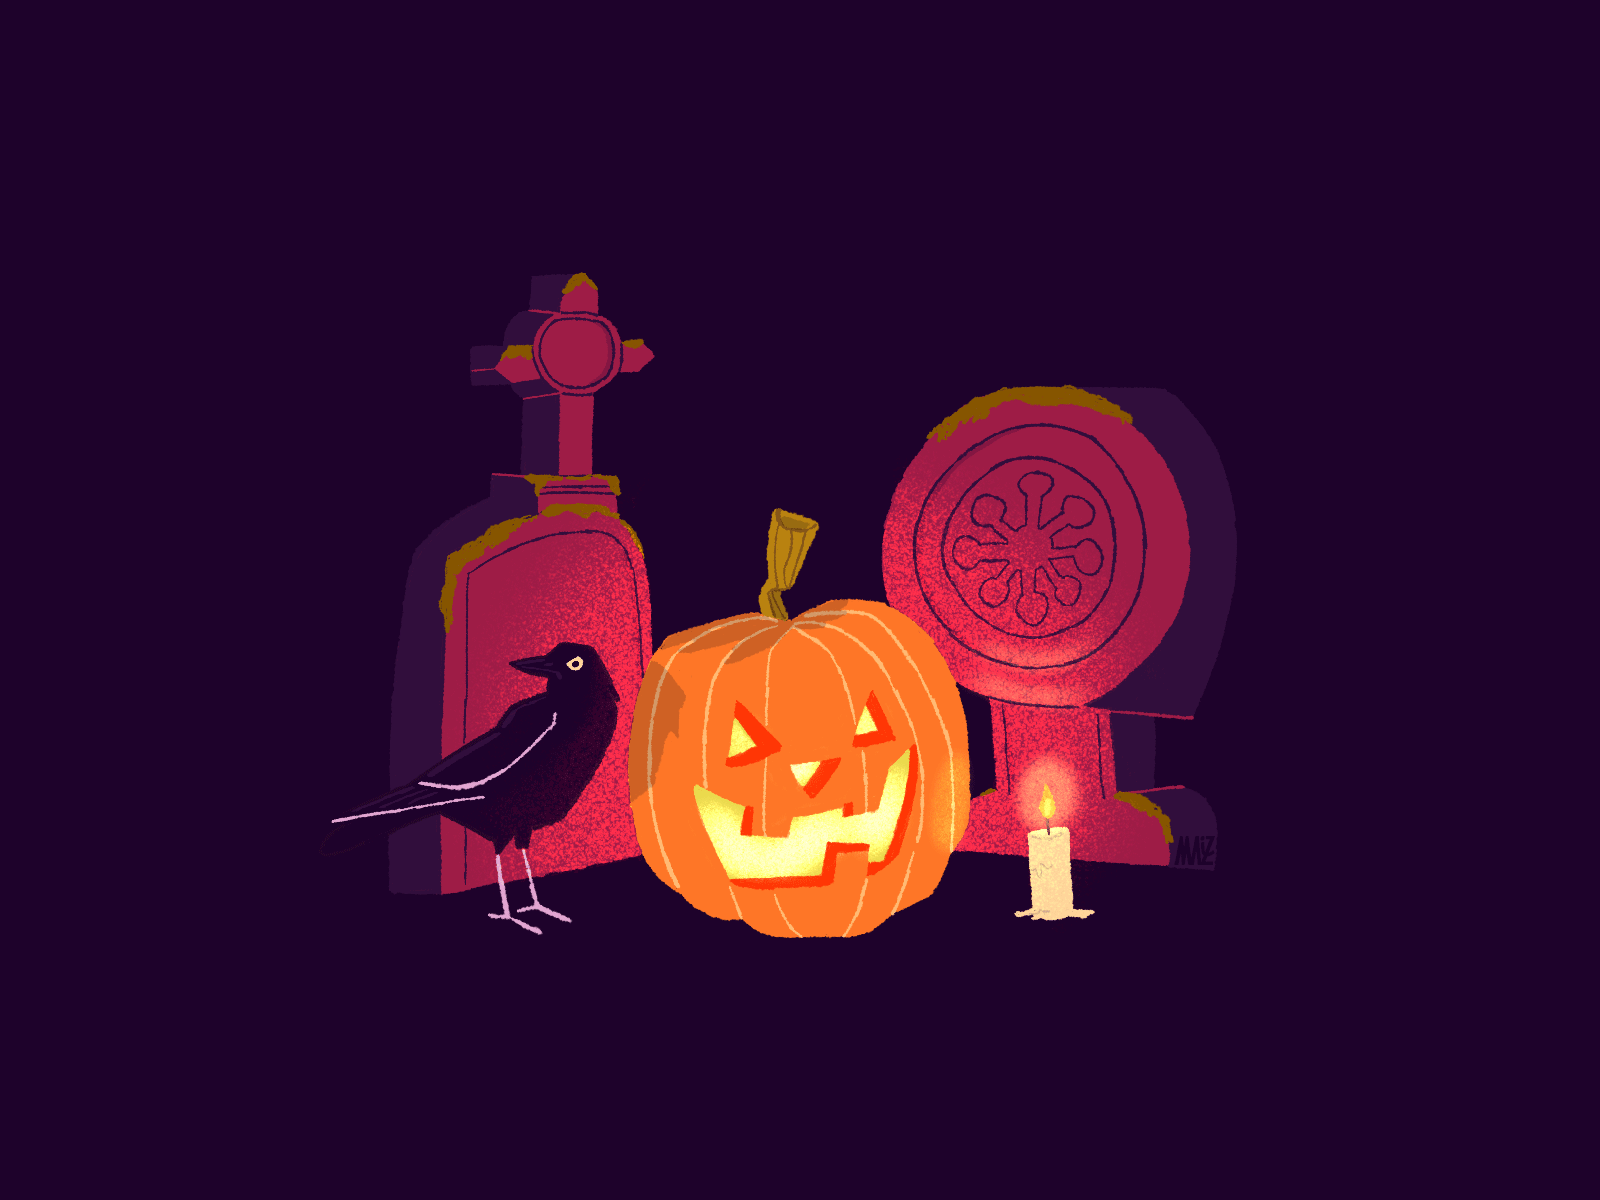 Halloween: The night of the souls animated gif animation animation 2d cemetery colourful crow dani maiz doodle animation editorial illustration gif halloween halloween art illustration magazine illustration pumpkin tomb